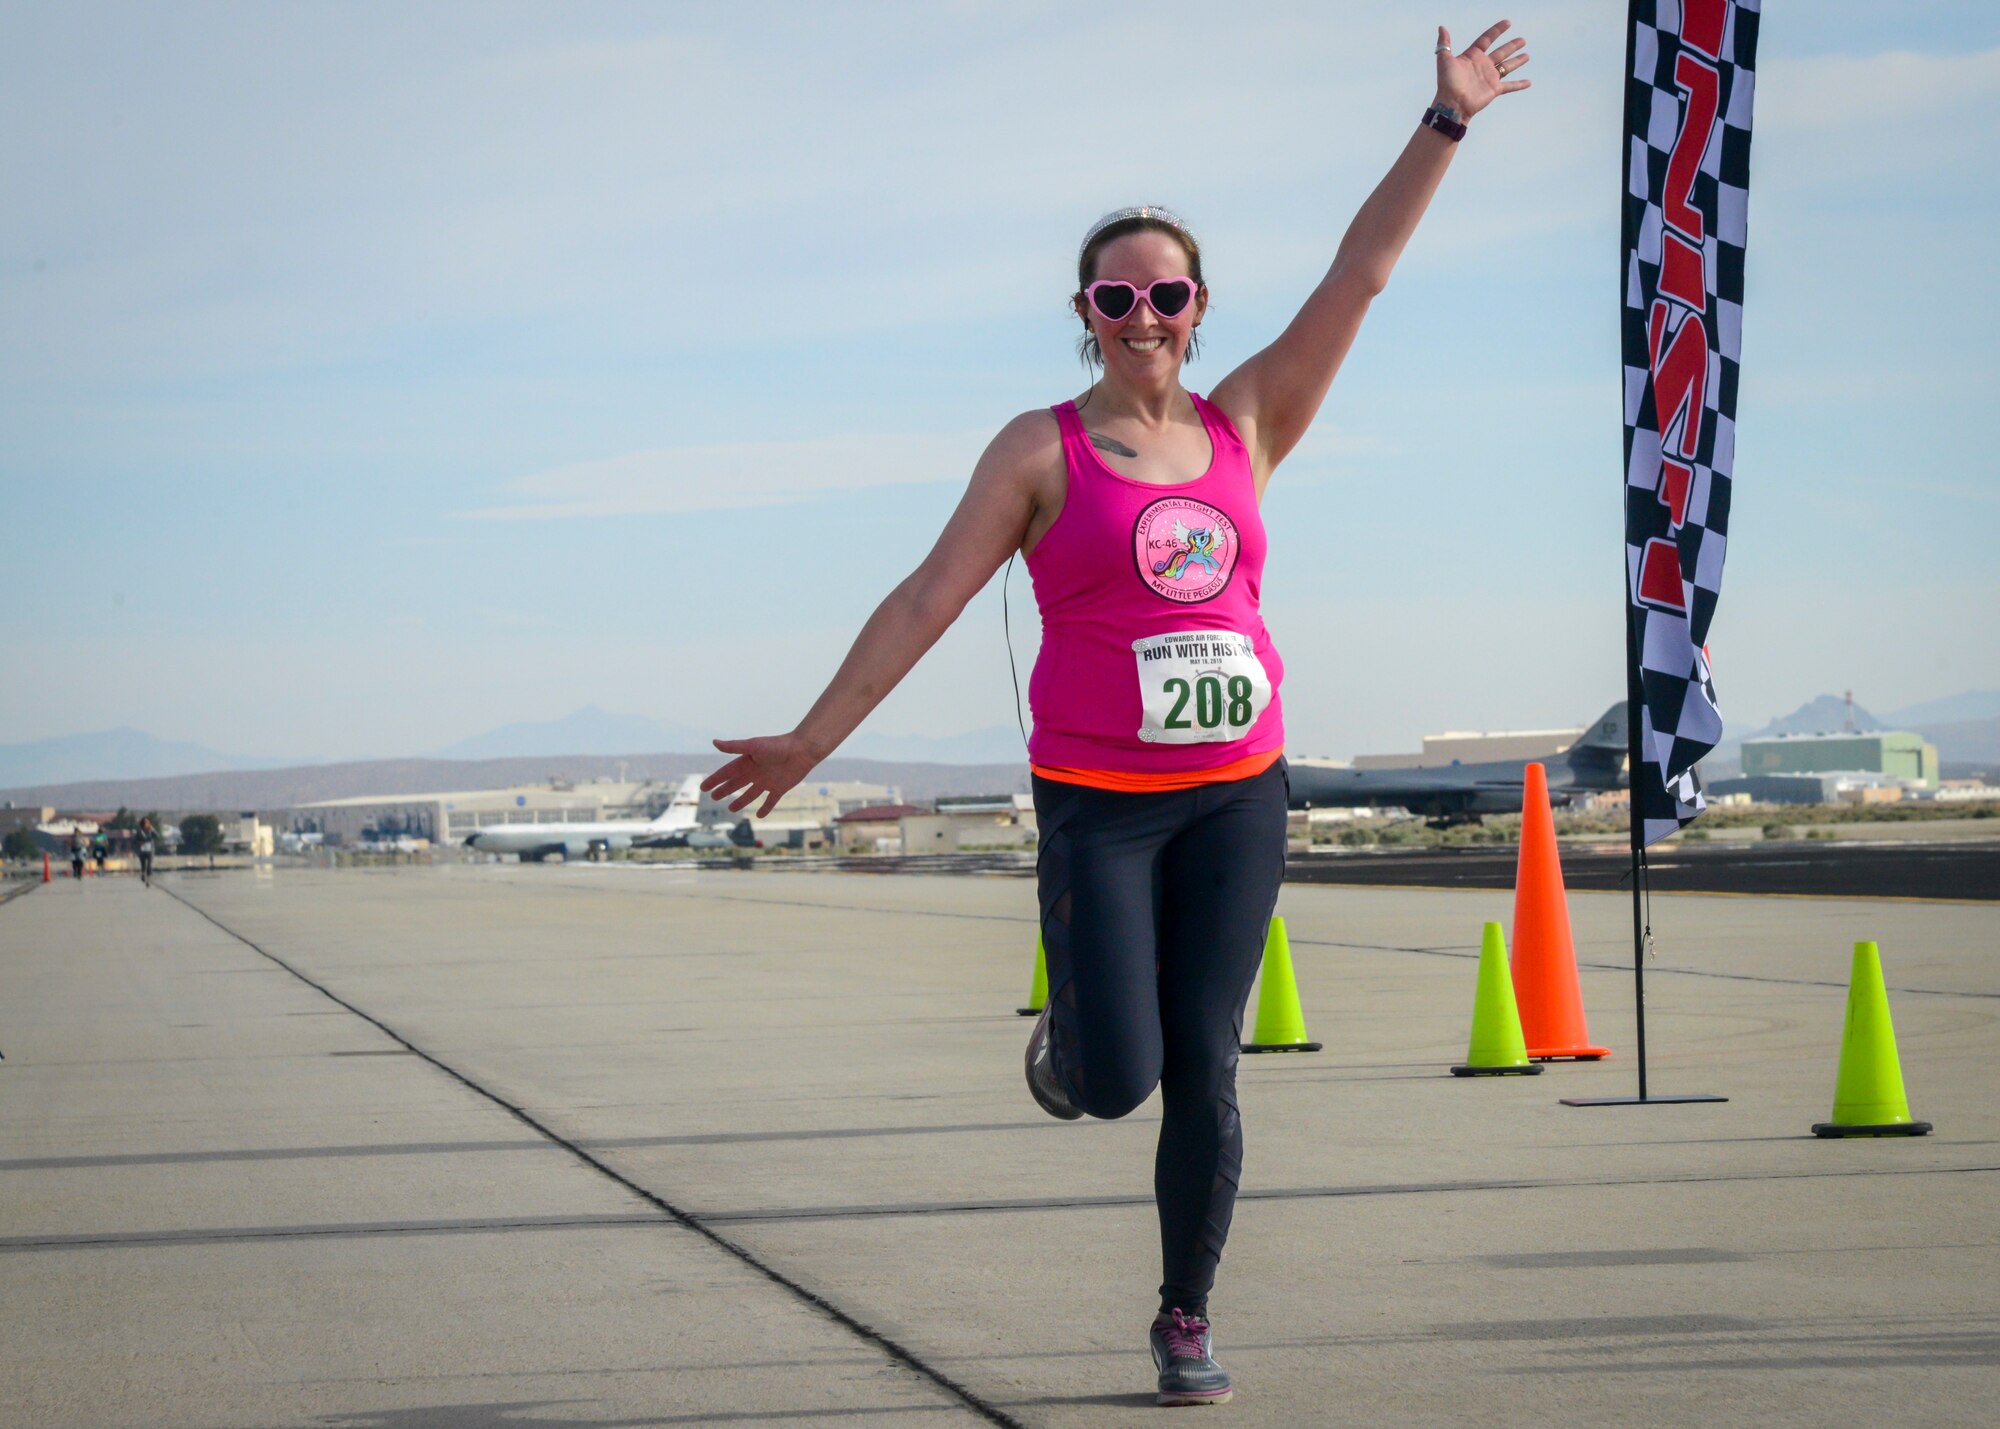 A runner strikes a pose as she crosses the finish line of the Run with History Half Marathon, 10k and 5k at Edwards Air Force Base, Calif., May 18. (U.S. Air Force photo by Giancarlo Casem)